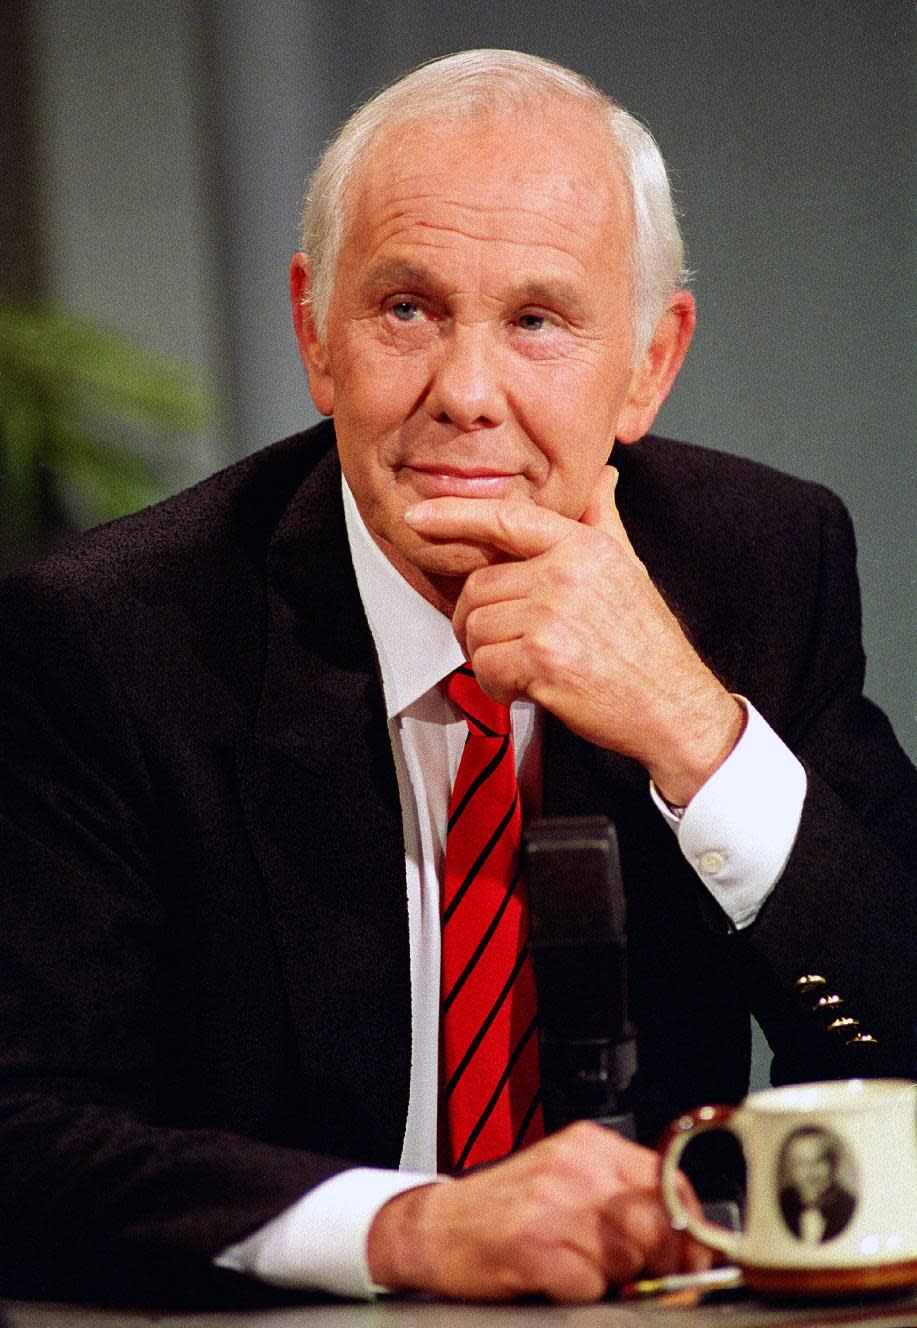 FILE - This May 22, 1992 file photo shows talk show host Johnny Carson, with his personalized coffee cup in front of him, watching clips from earlier shows during the last taping of the "Tonight Show" in front of family and friends in Burbank, Calif. (AP Photo/Douglas C. Pizac, file)